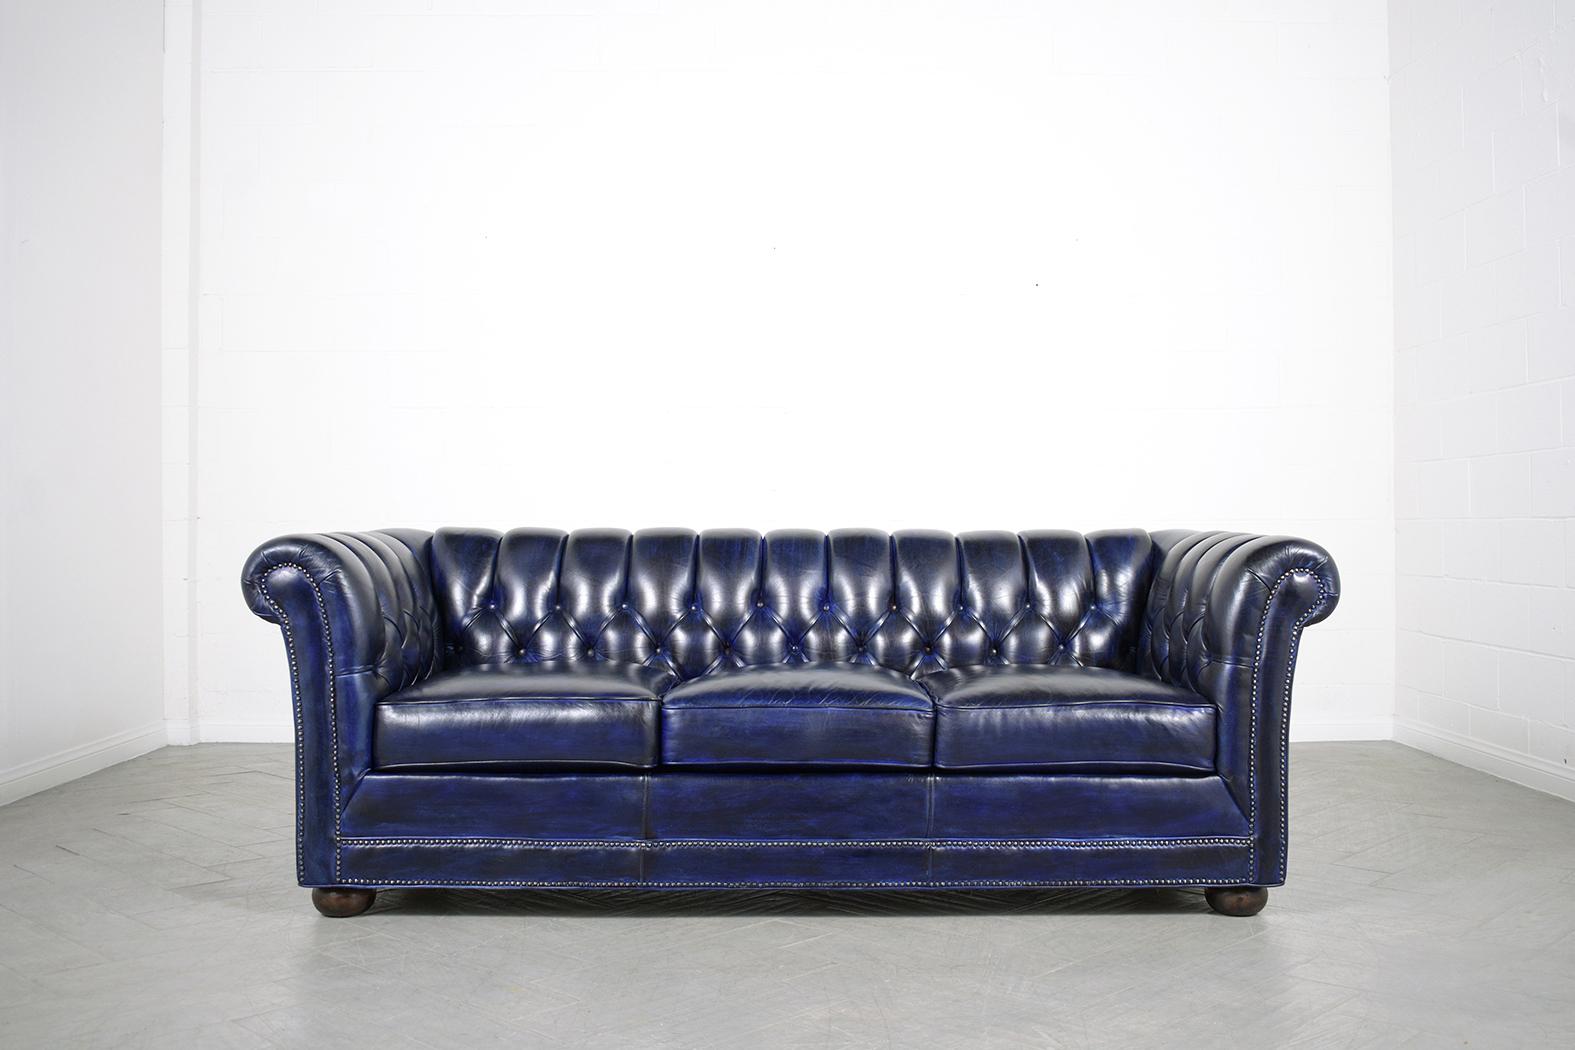 Polished Vintage Chesterfield Leather Sofa